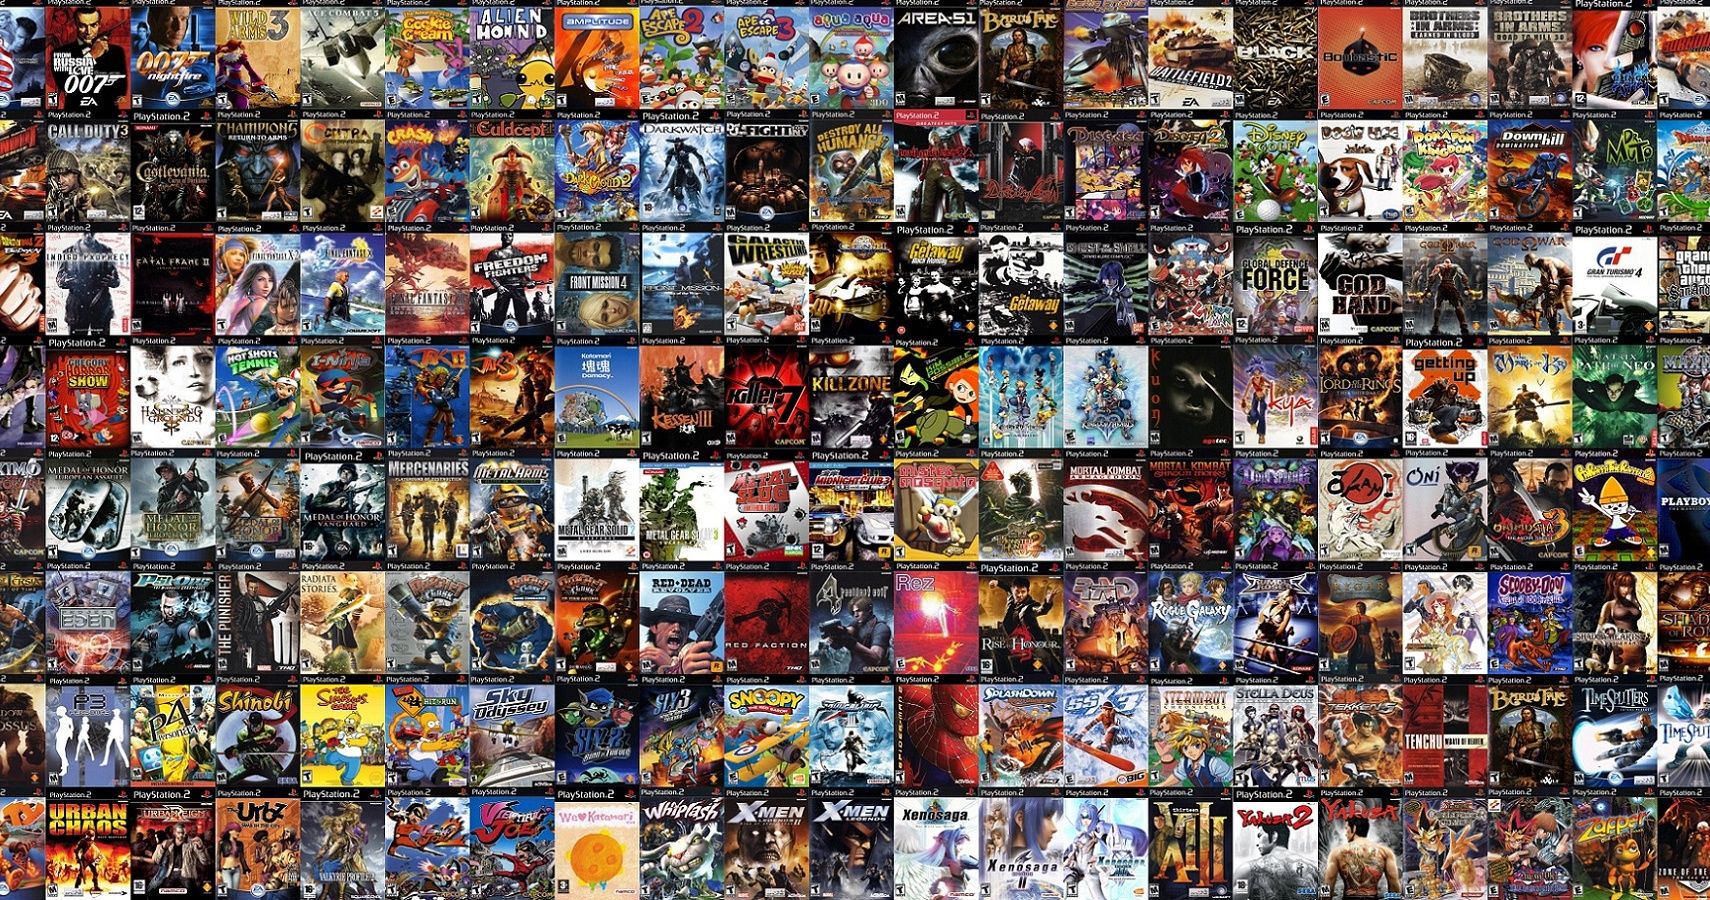 5 Classic PlayStation 2 Games That Still Look Good (And 5 That Just Don't)